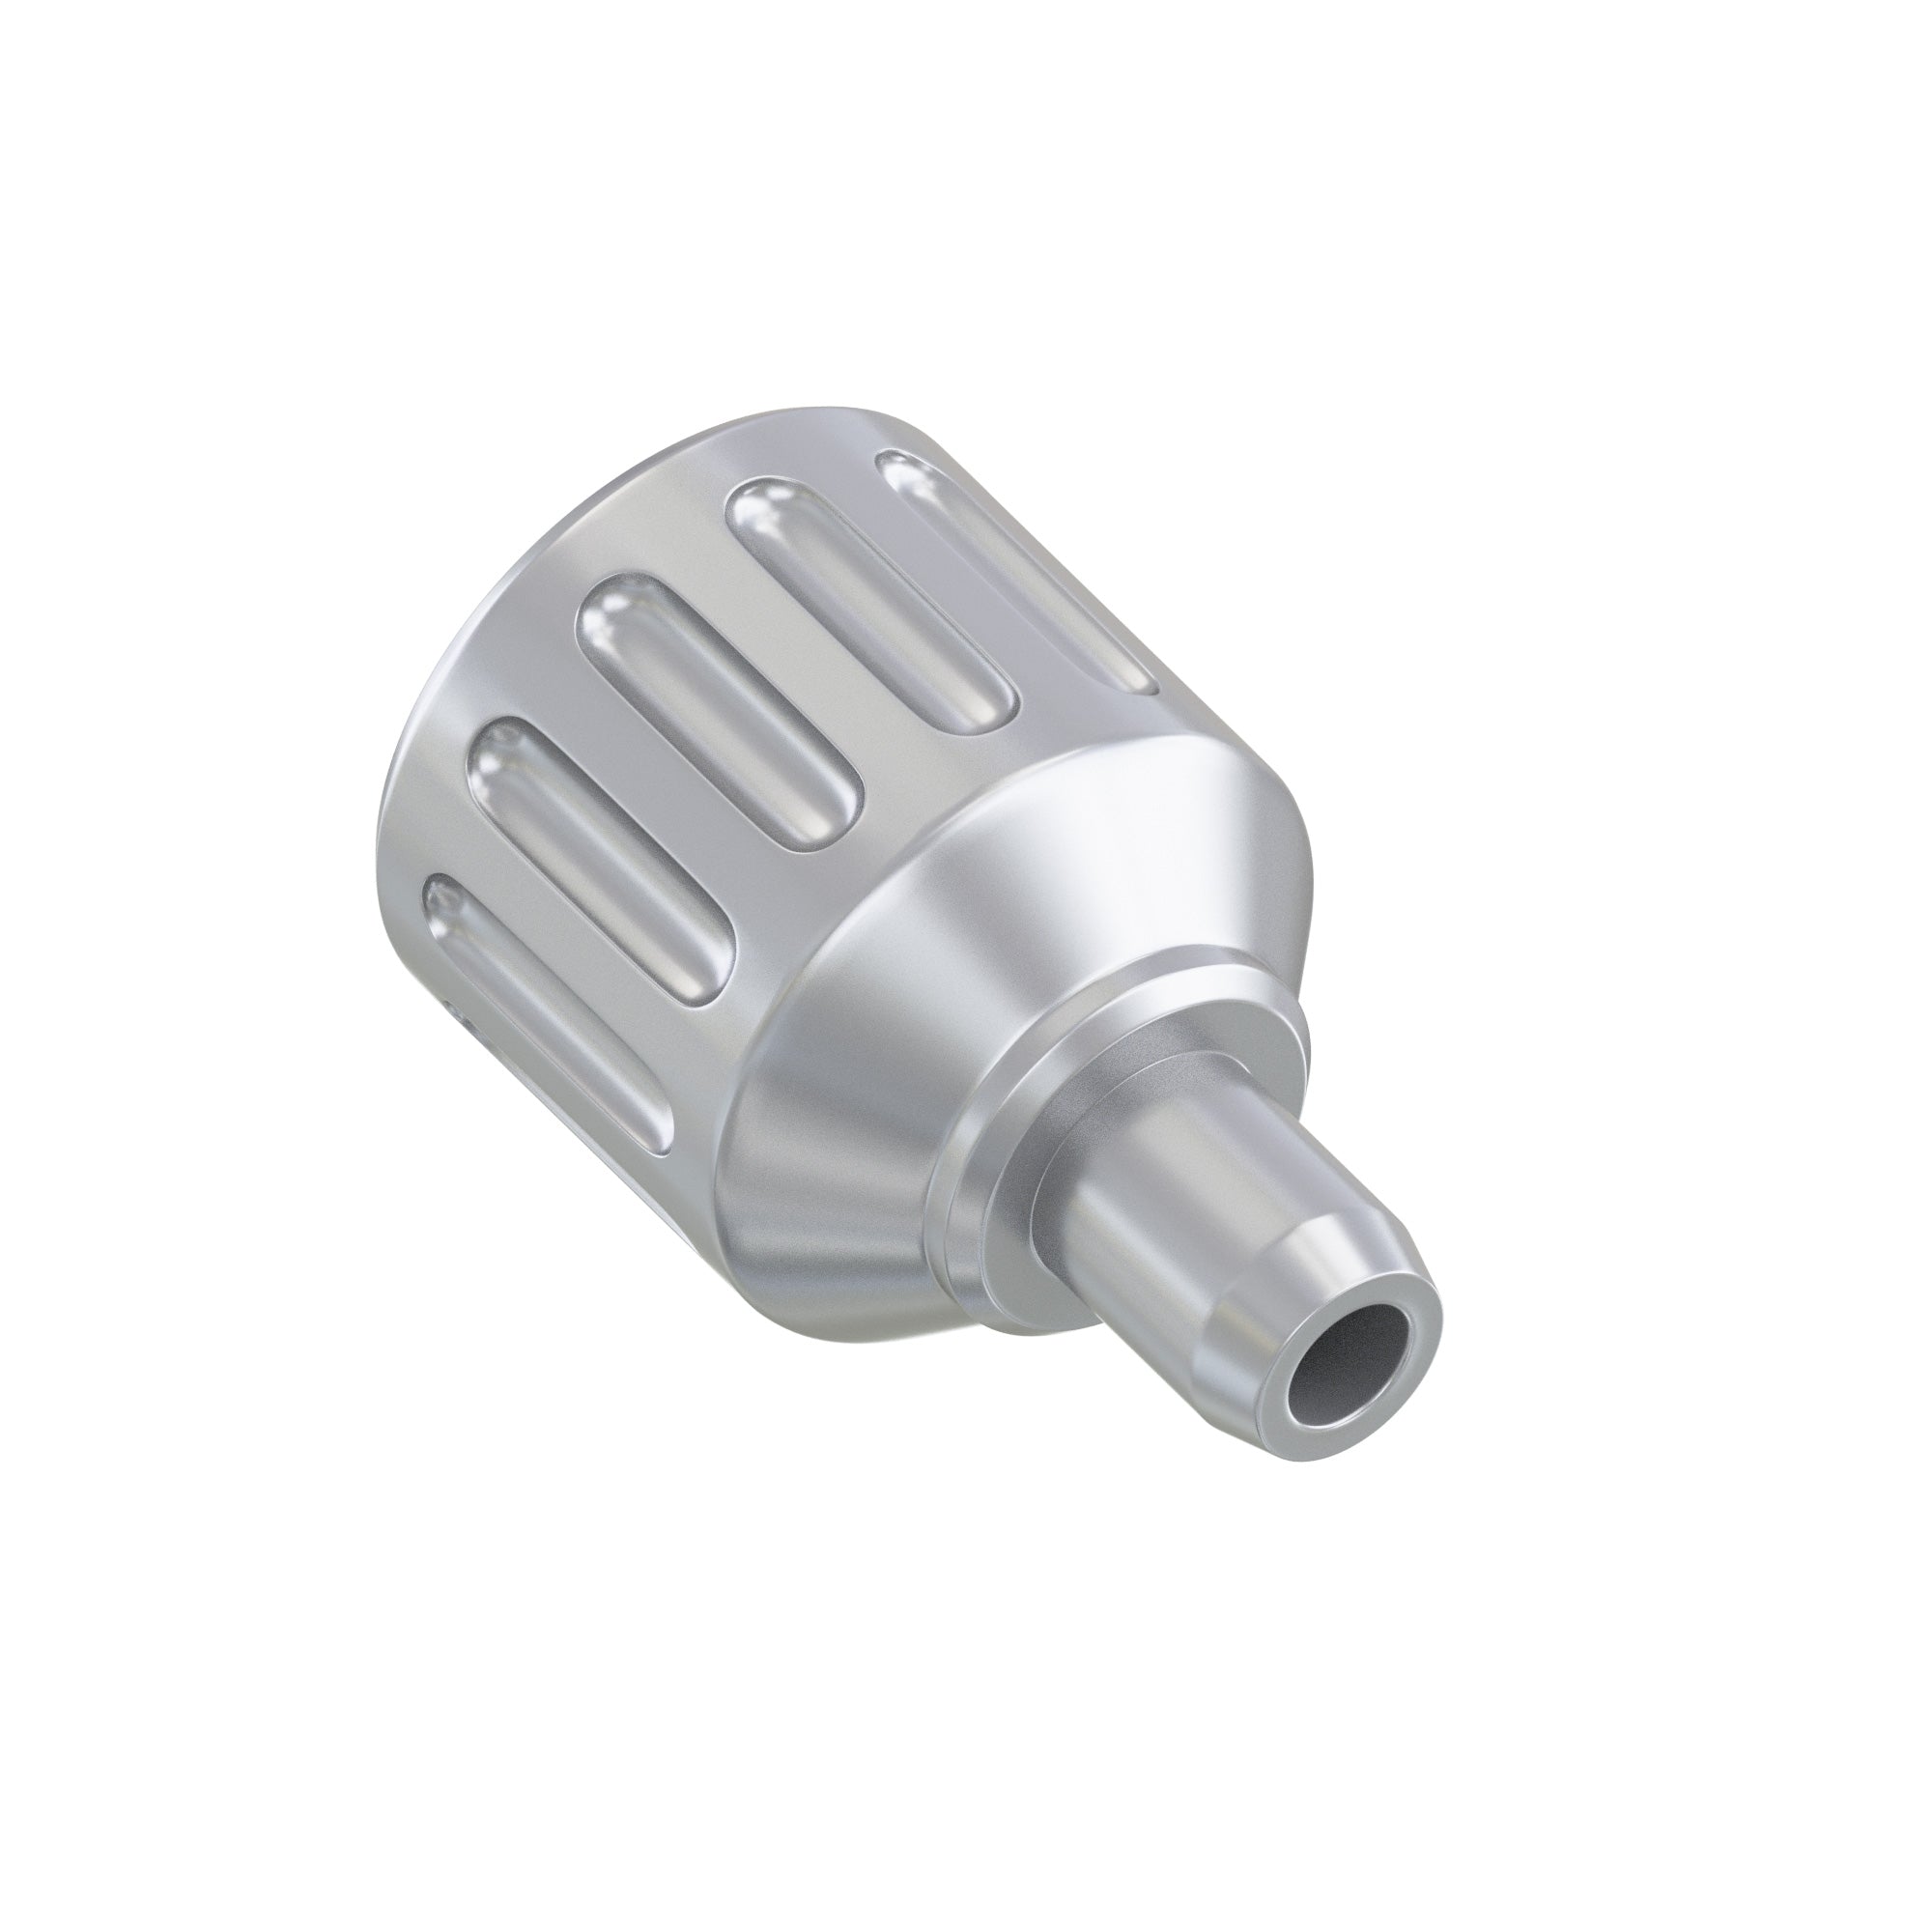 DSI Universal Driver All-In-One - For Implants And Prosthetics